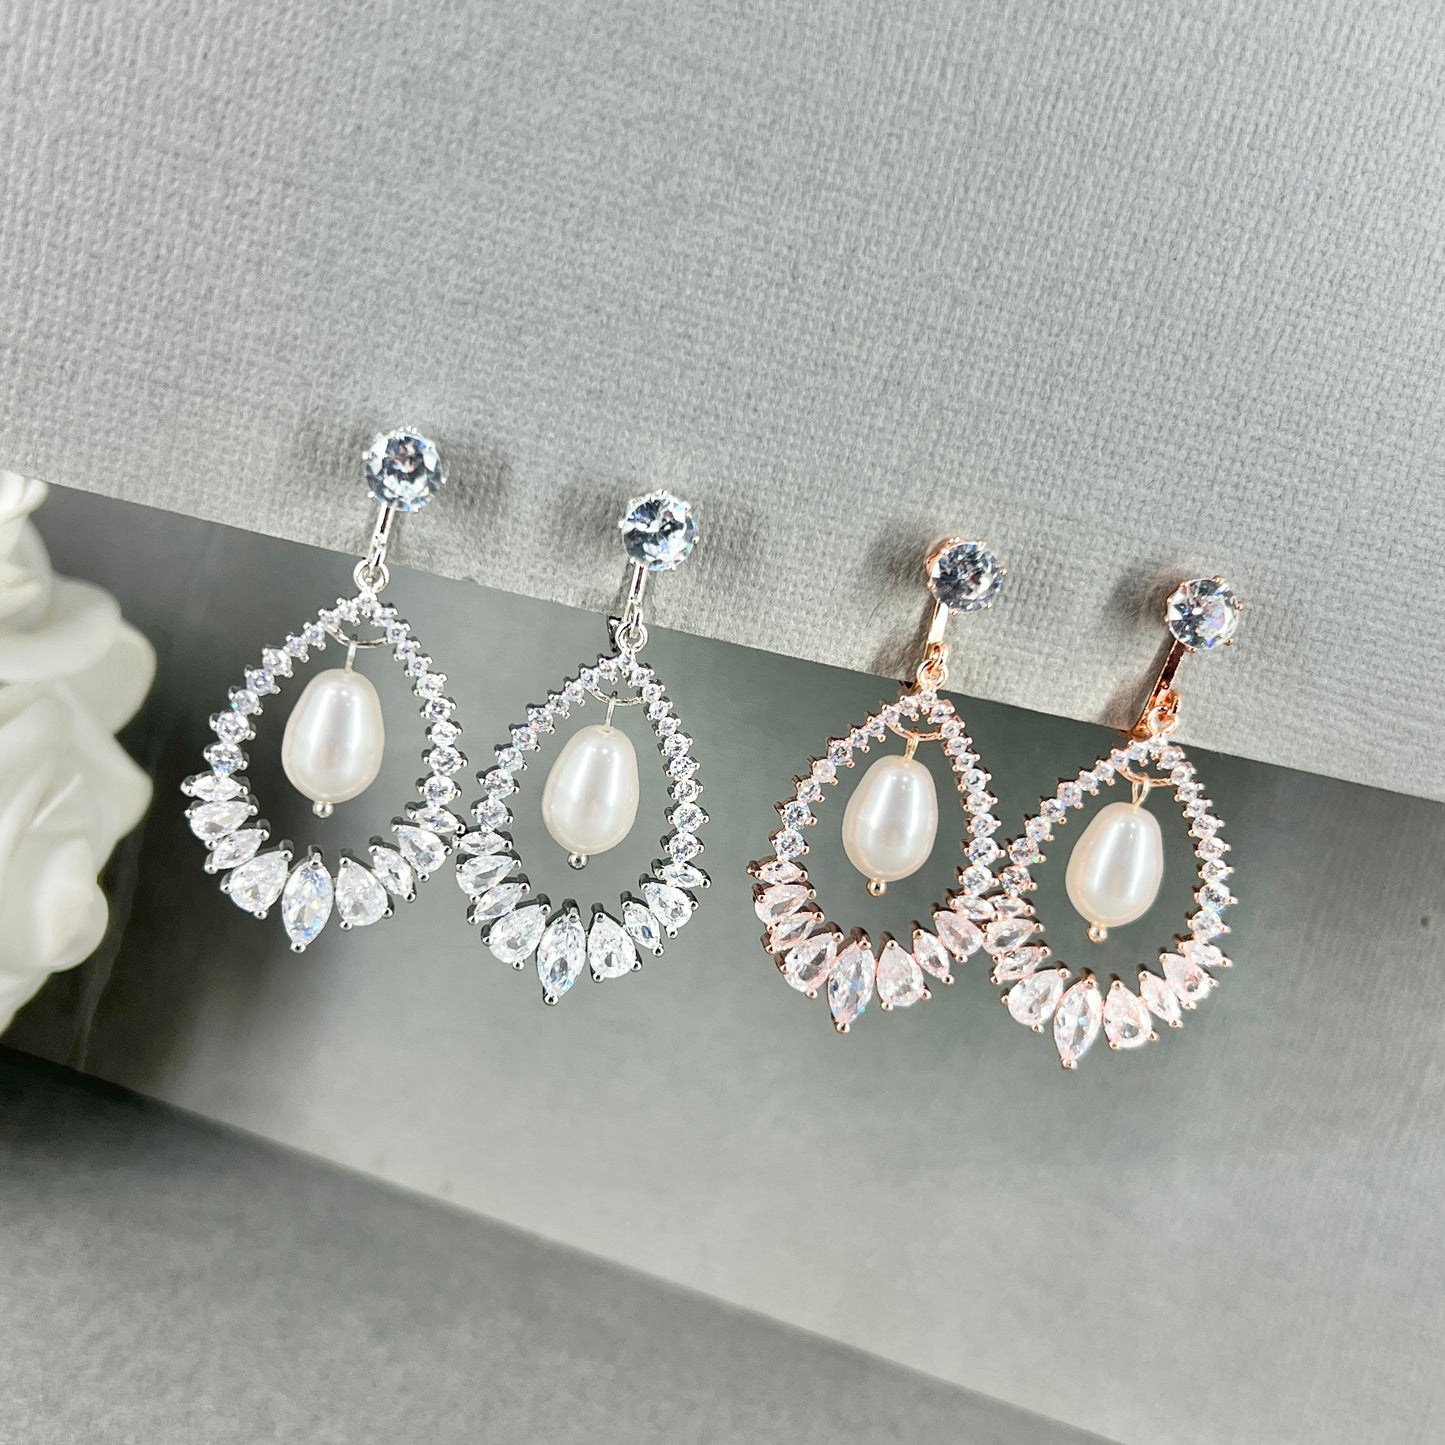 Madix CZ Oval and Pearl Clip-on Earrings